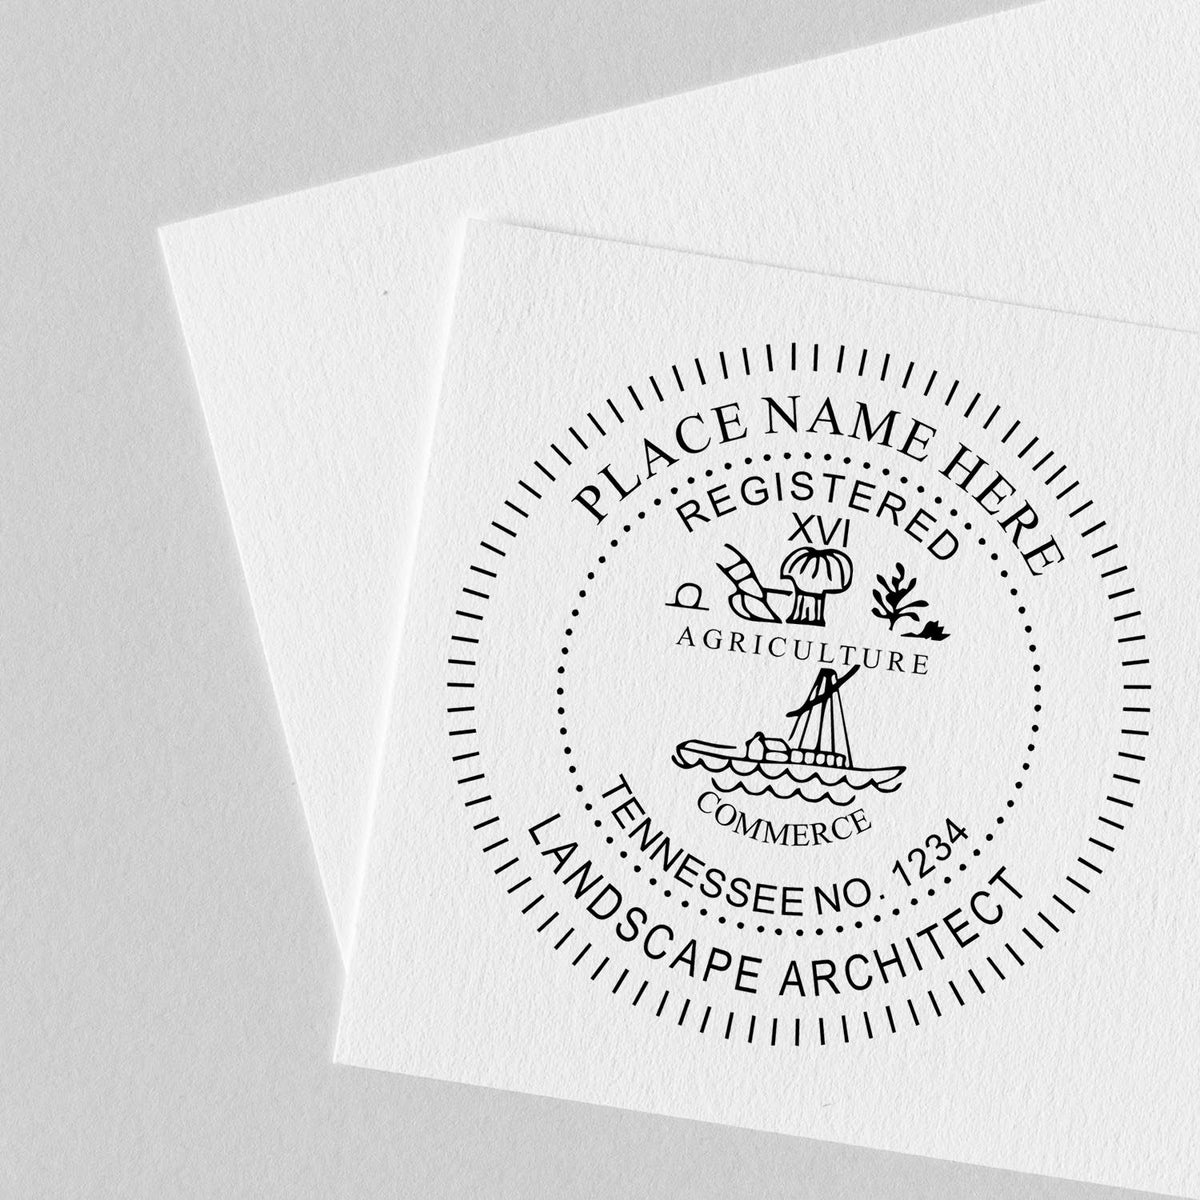 This paper is stamped with a sample imprint of the Tennessee Landscape Architectural Seal Stamp, signifying its quality and reliability.